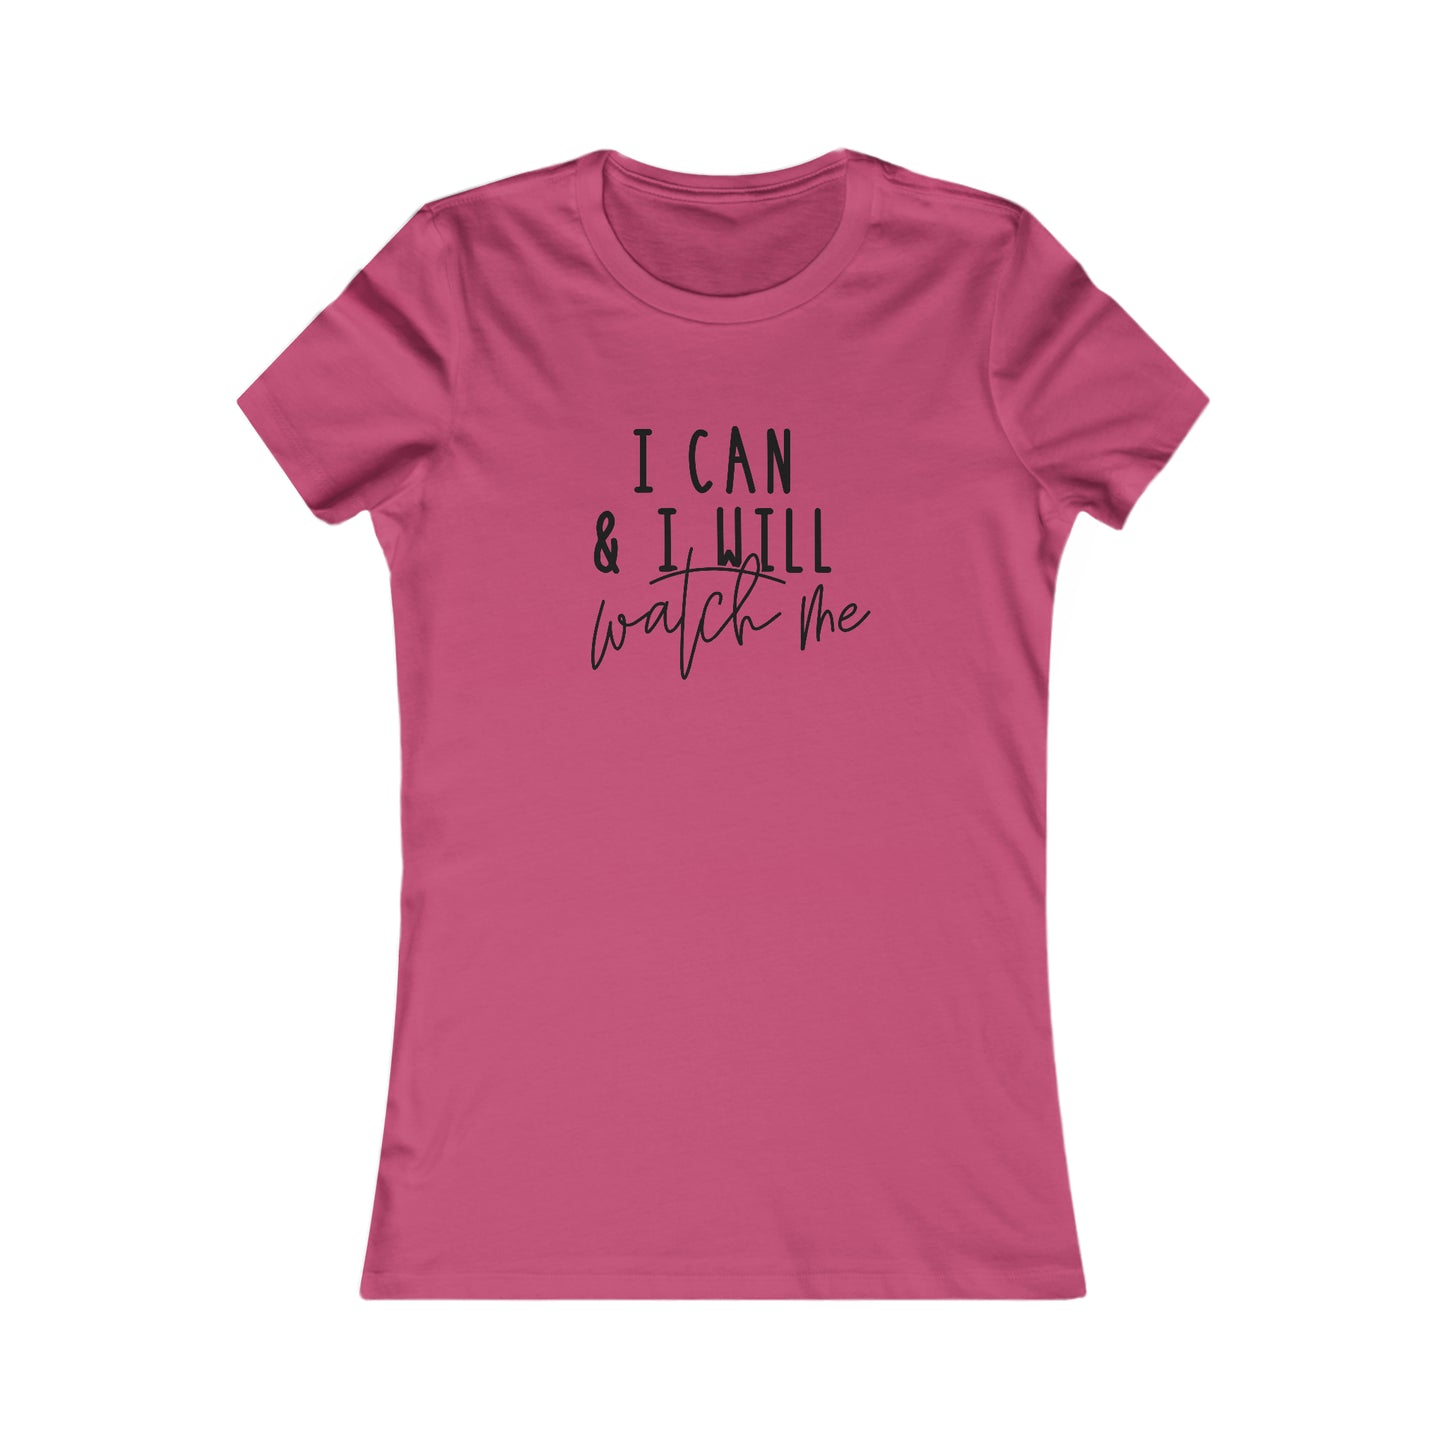 I Can, I Will - Women's Favorite Tee